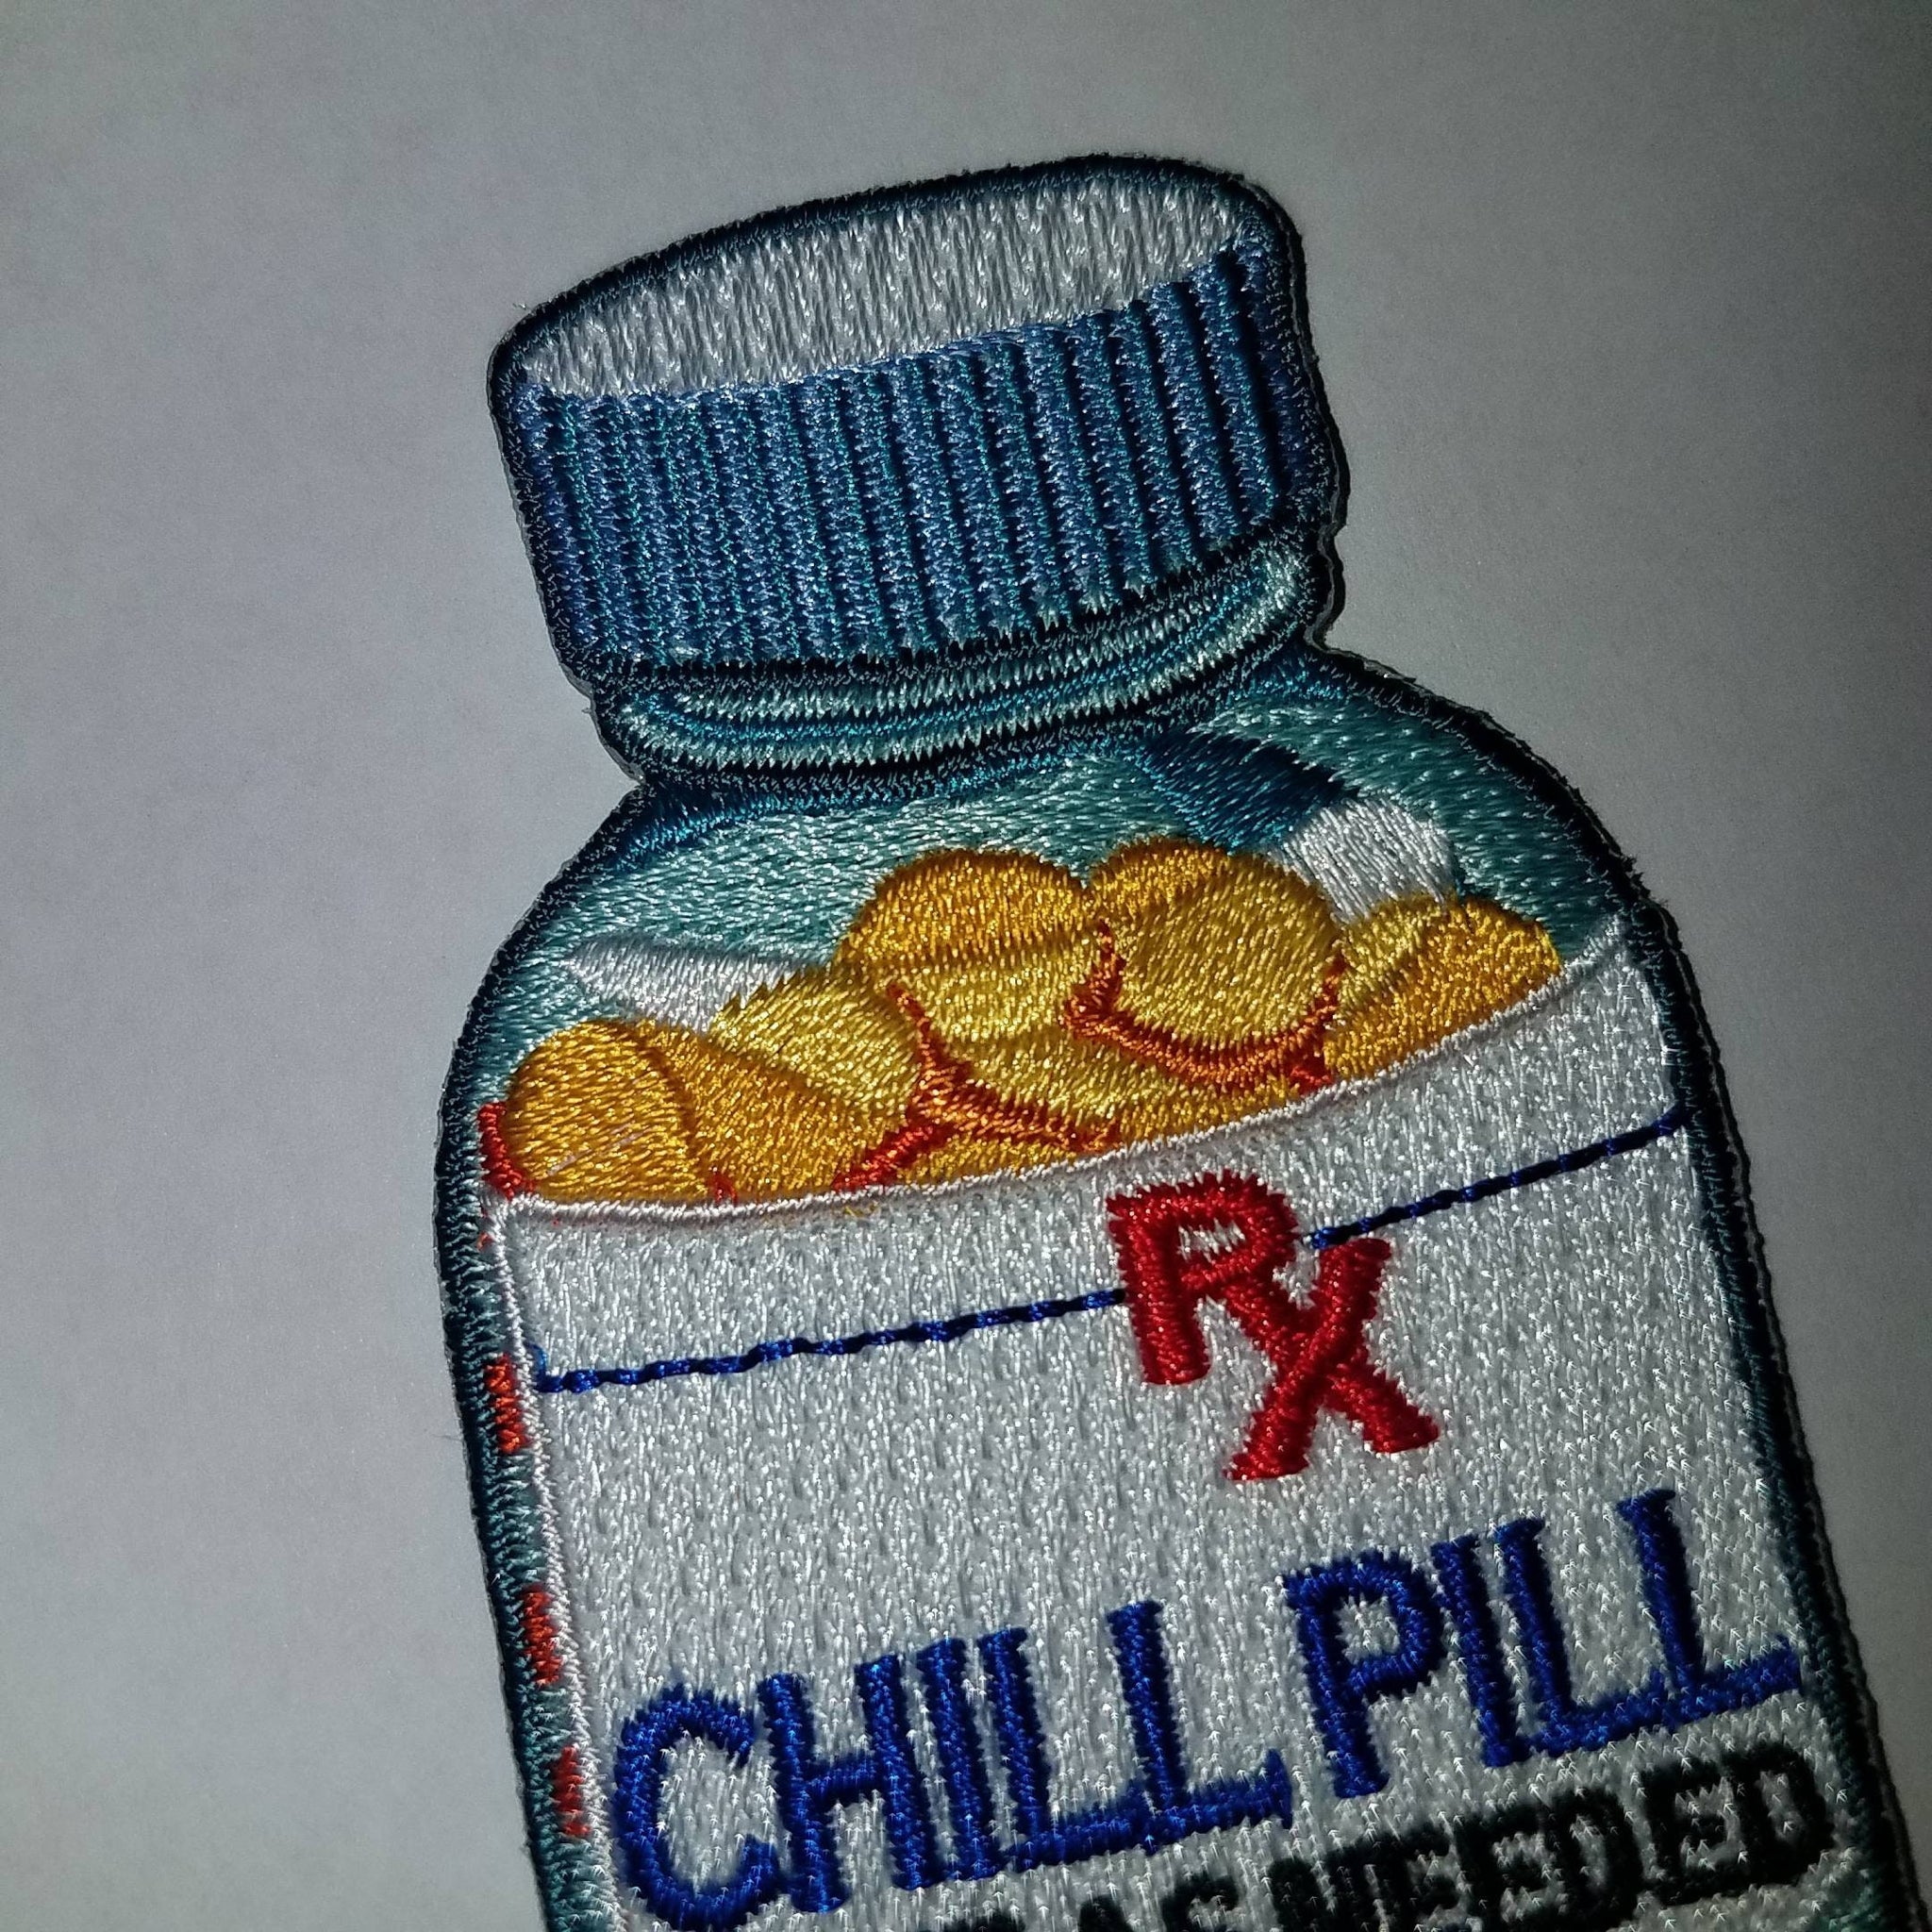 Vintage "Chill Pill" 1-pc, Embroidered Patch, Fun Appliques, Iron or Sew On Patches, Cool Patches